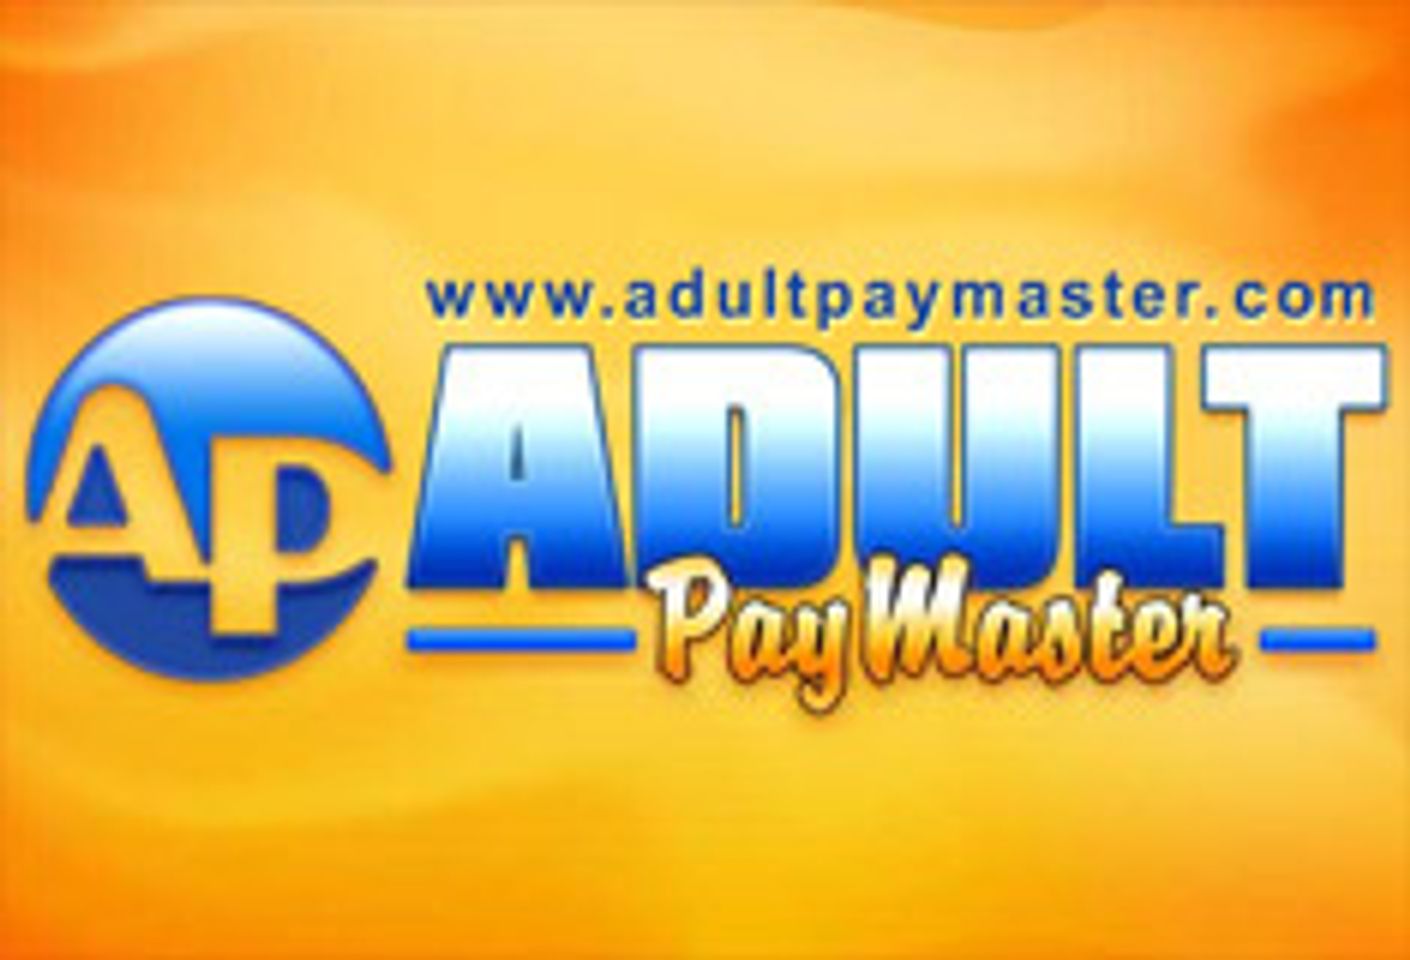 Adult PayMaster Adds Four Niches